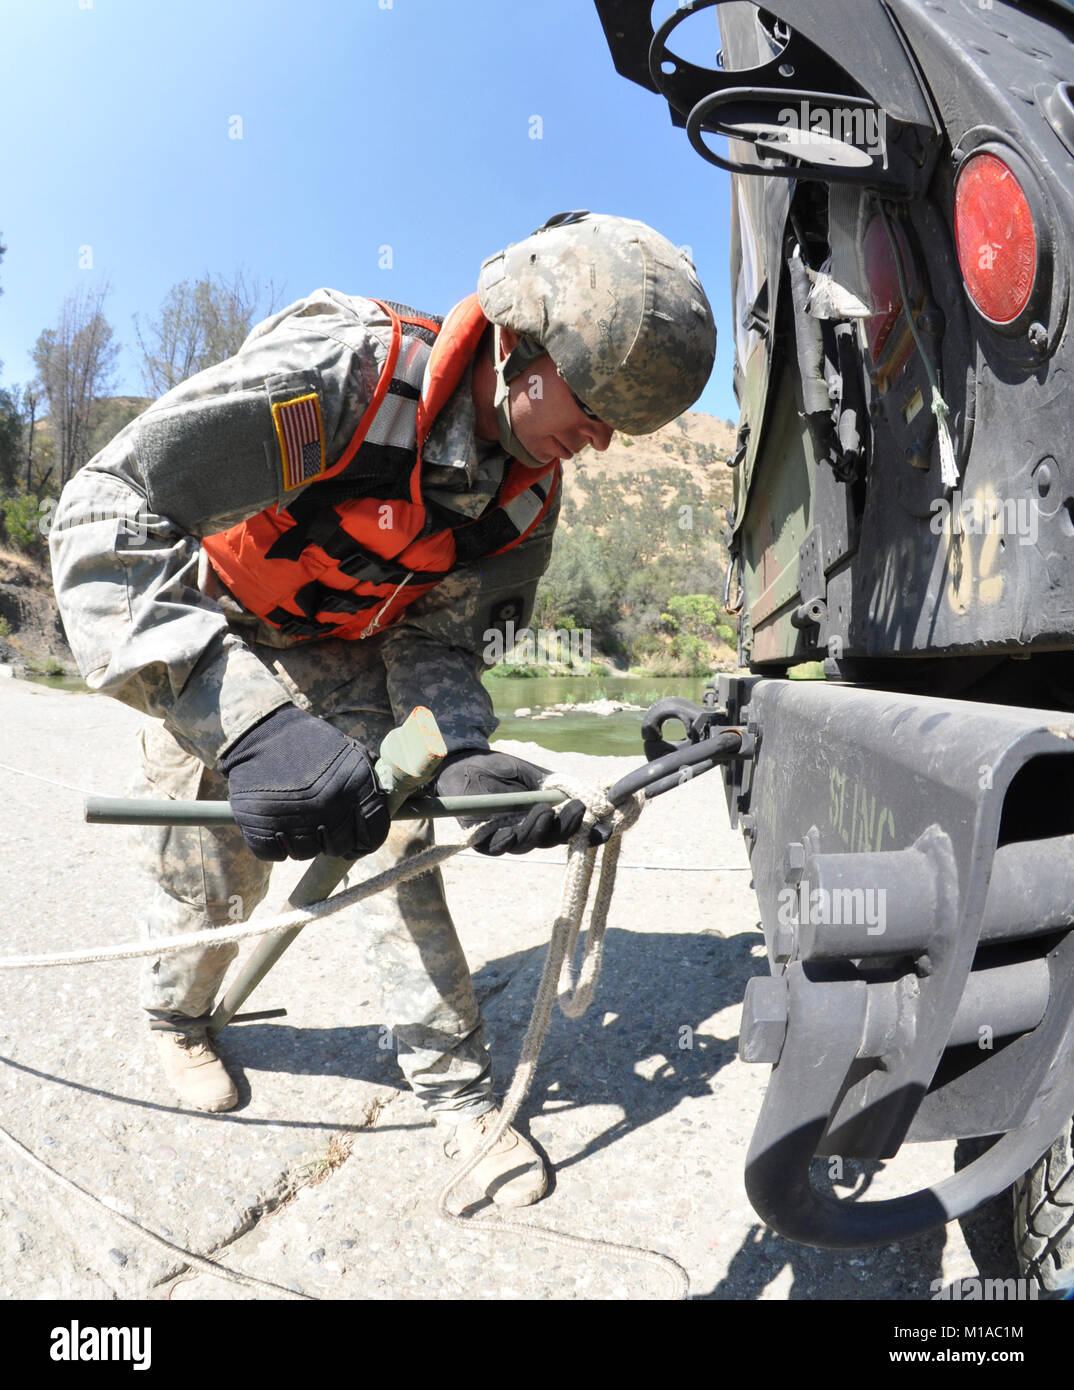 Spc. Jason Lansdale of the 132nd Multirole Bridge Company (MRBC), based in Redding, California, ties a rope to a humvee Aug. 7 at Cache Creek National Park in Yolo County, California. (U.S. Army National Guard photo/Staff Sgt. Eddie Siguenza) Stock Photo